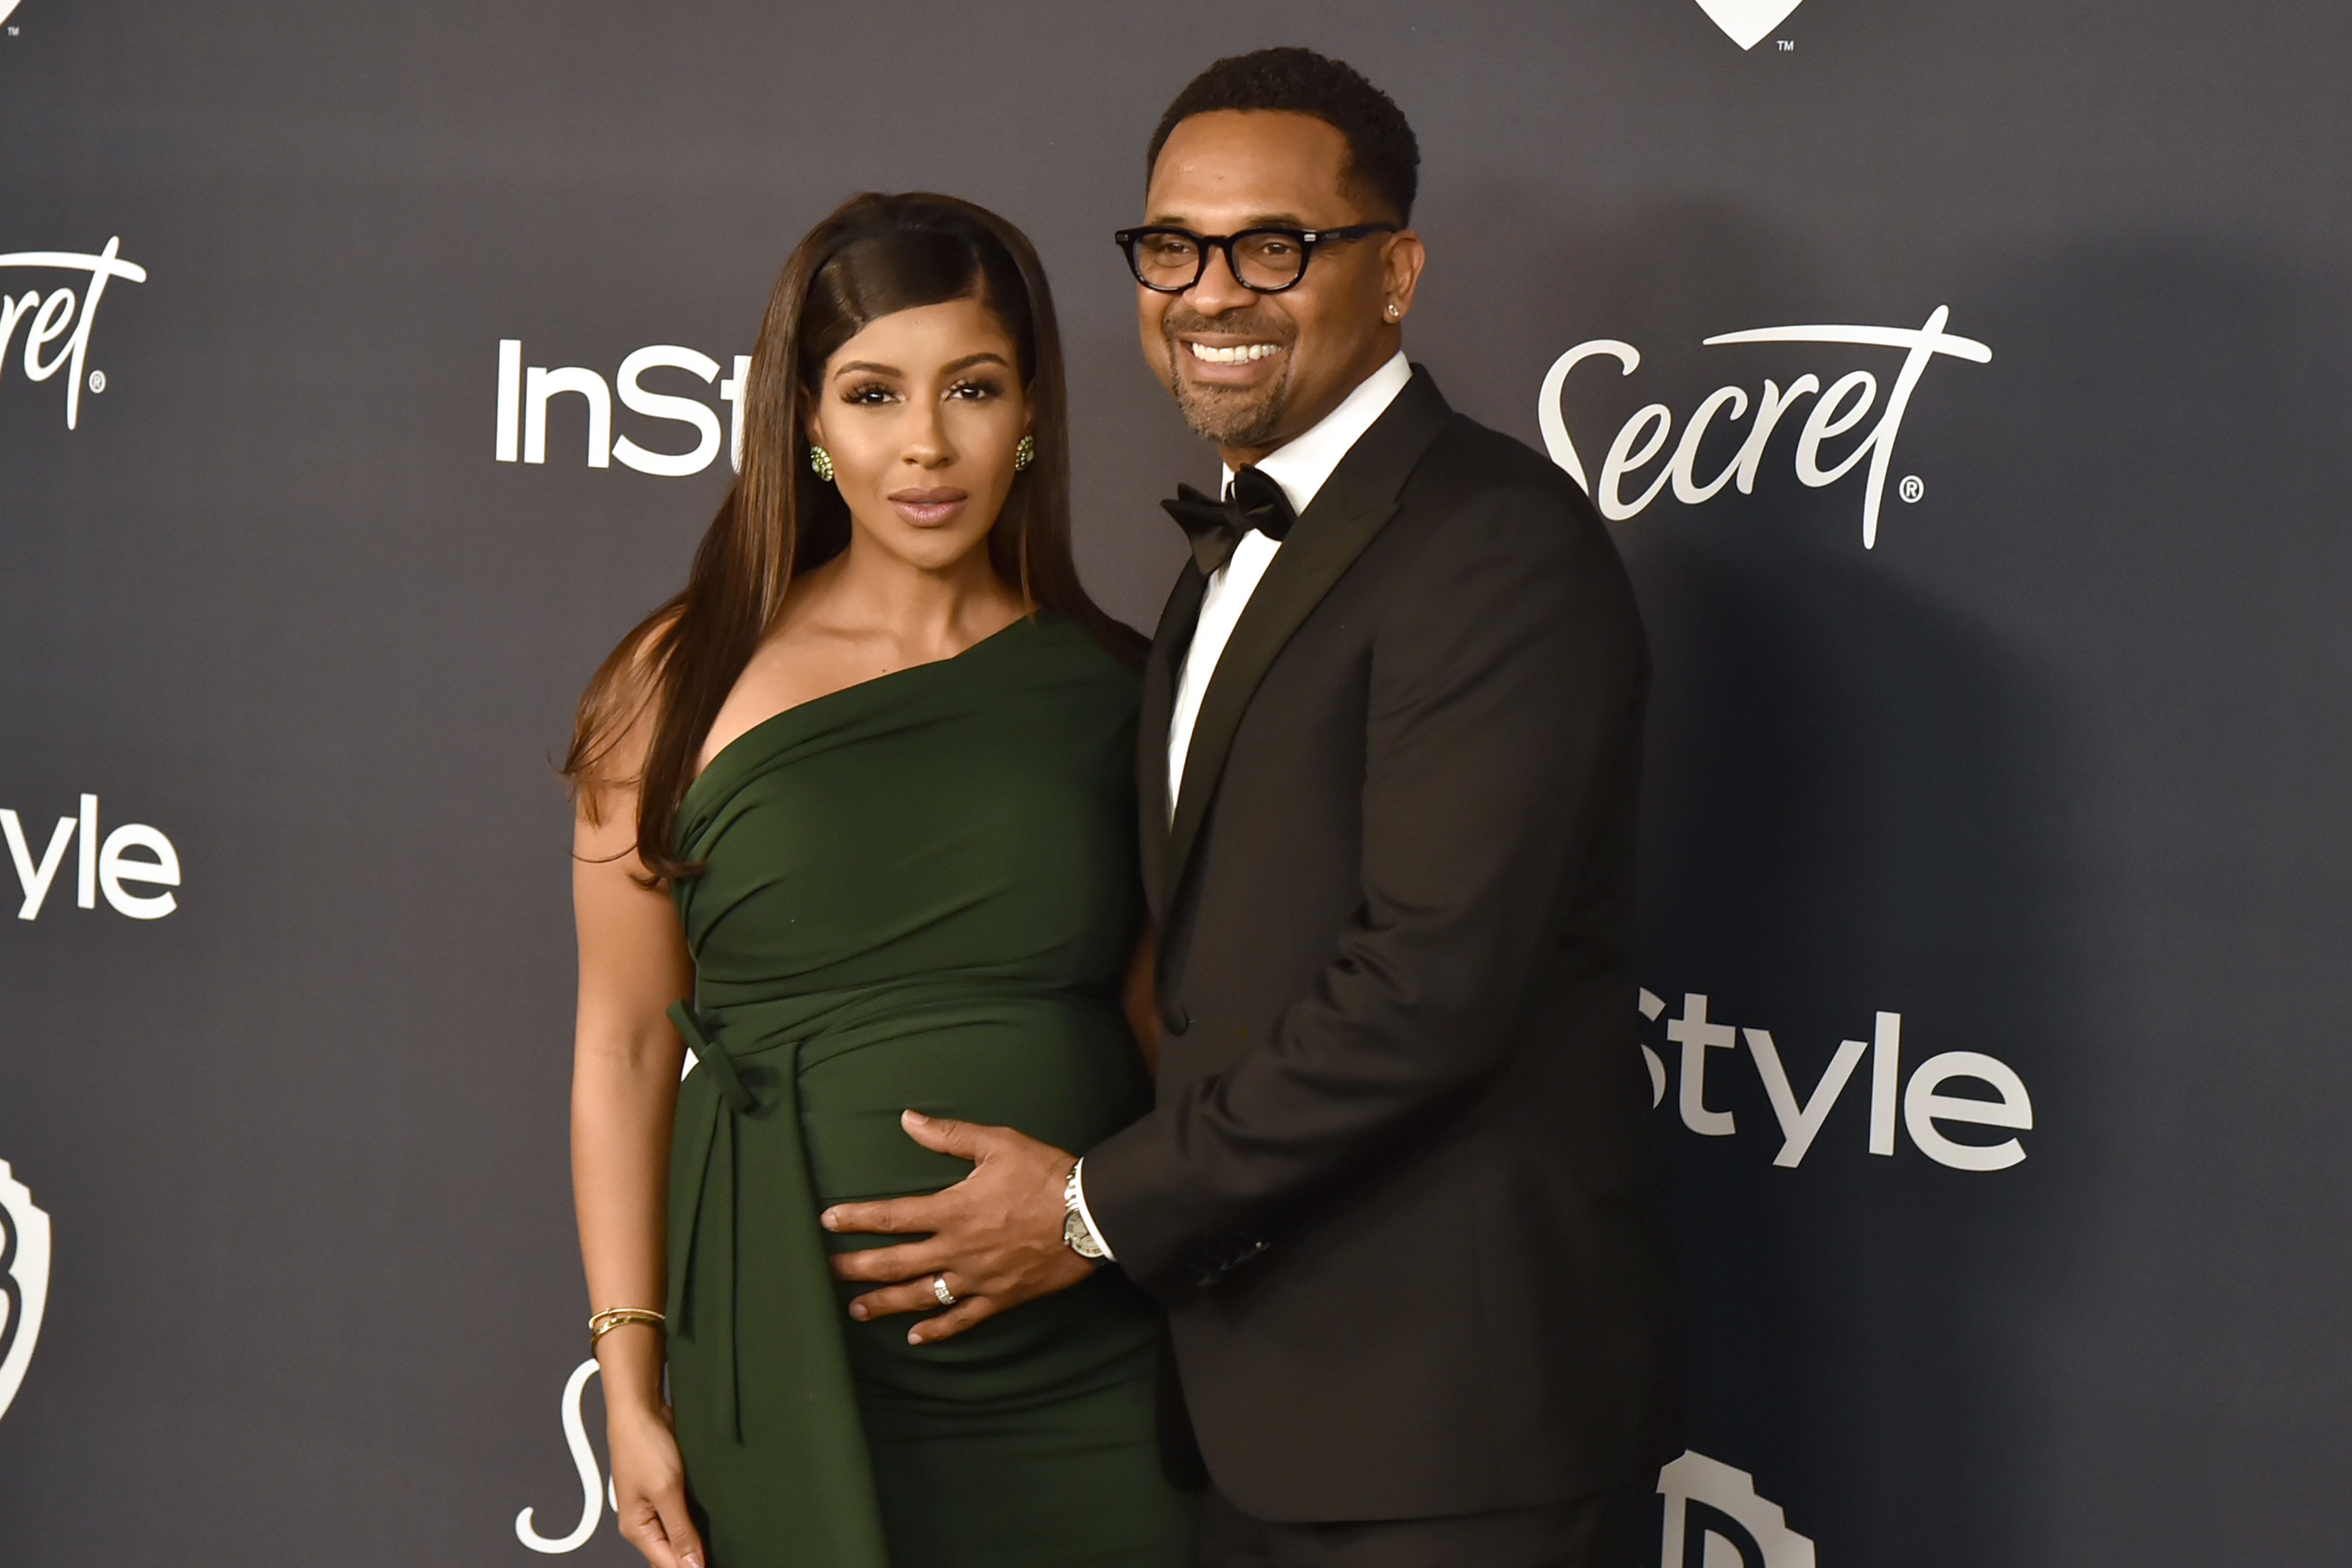 Kyra and Mike Epps arrives at the Annual Warner Bros. and InStyle Golden Globe After Party on January 5, 2020 in Beverly Hills, California. | Photo: Getty Images